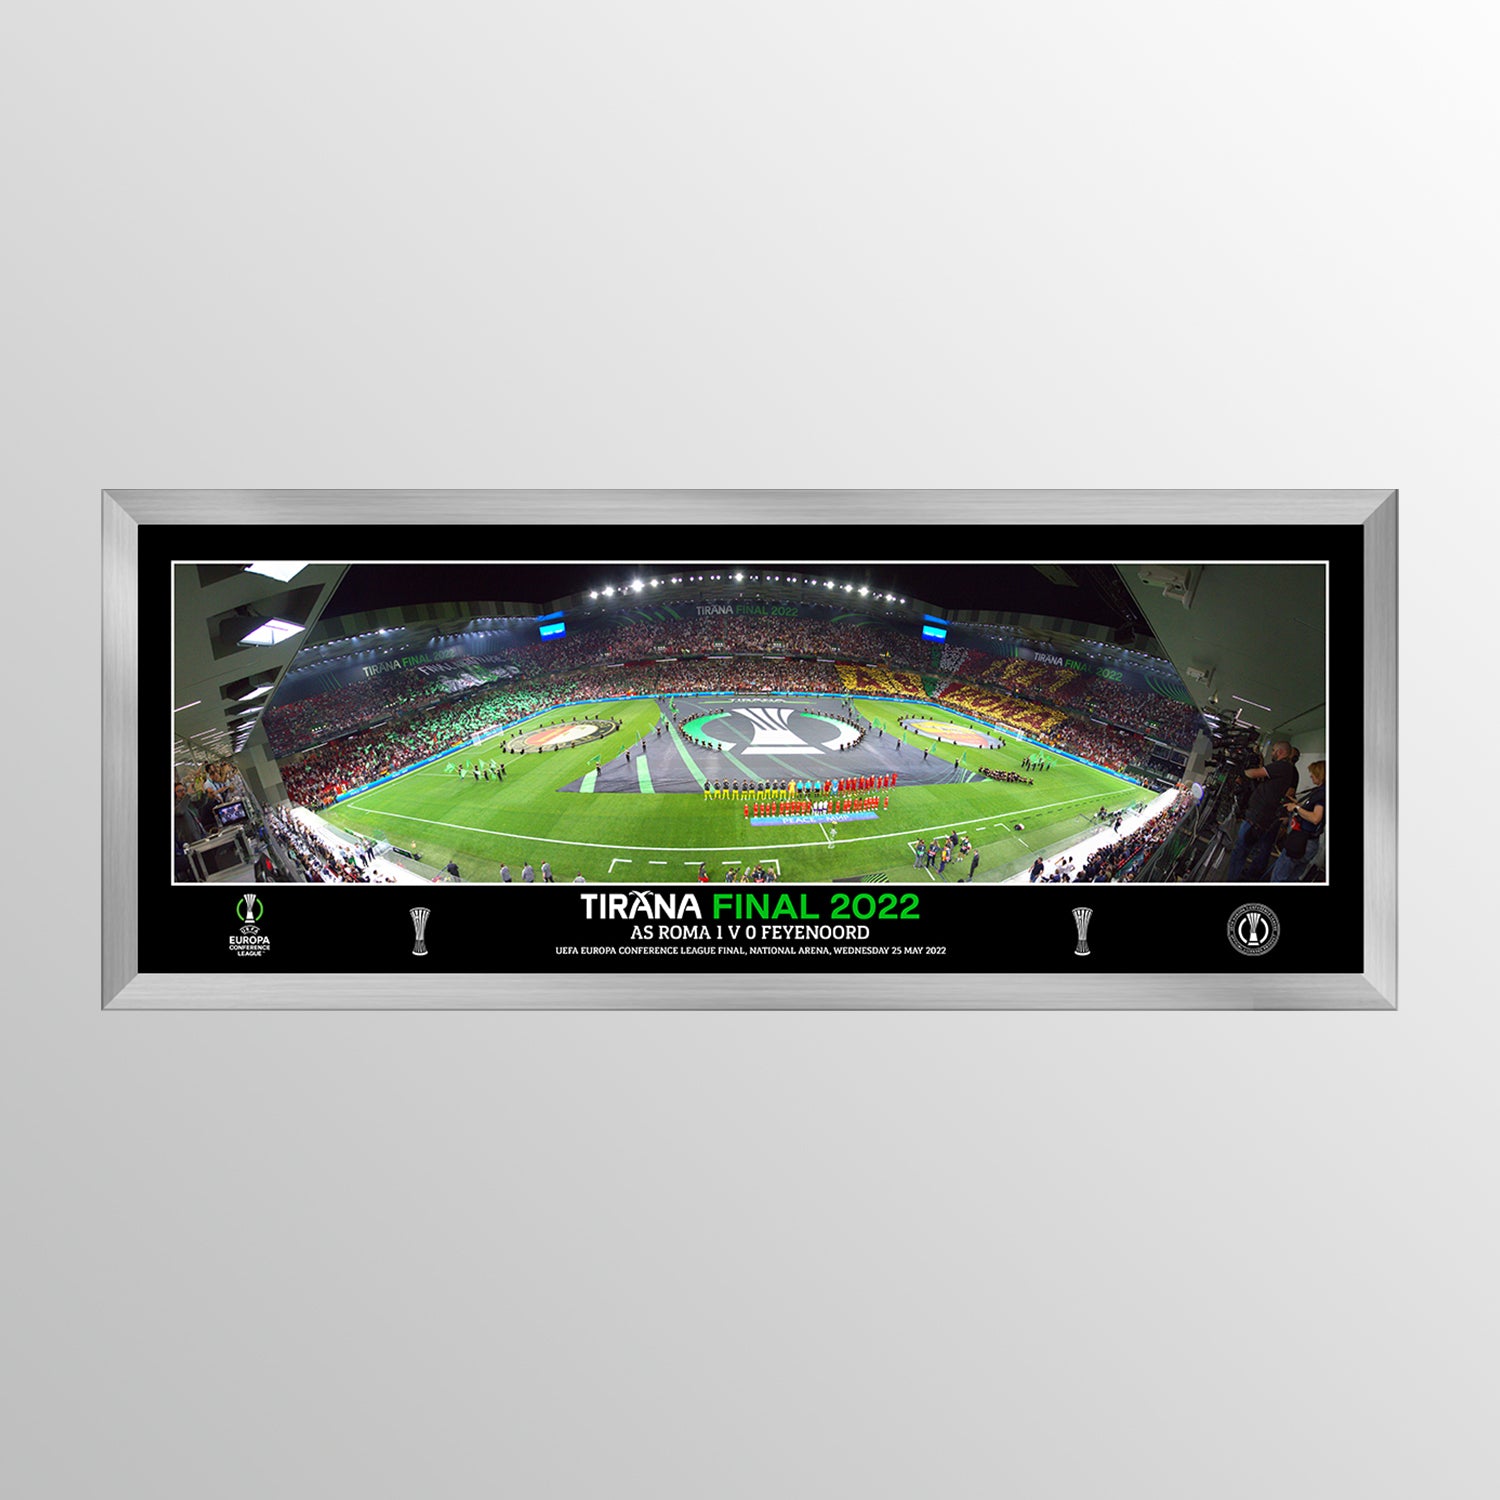 Tirana Panoramic Line Up Framed Print 30”x11" - Conference League Final UEFA Club Competitions Online Store